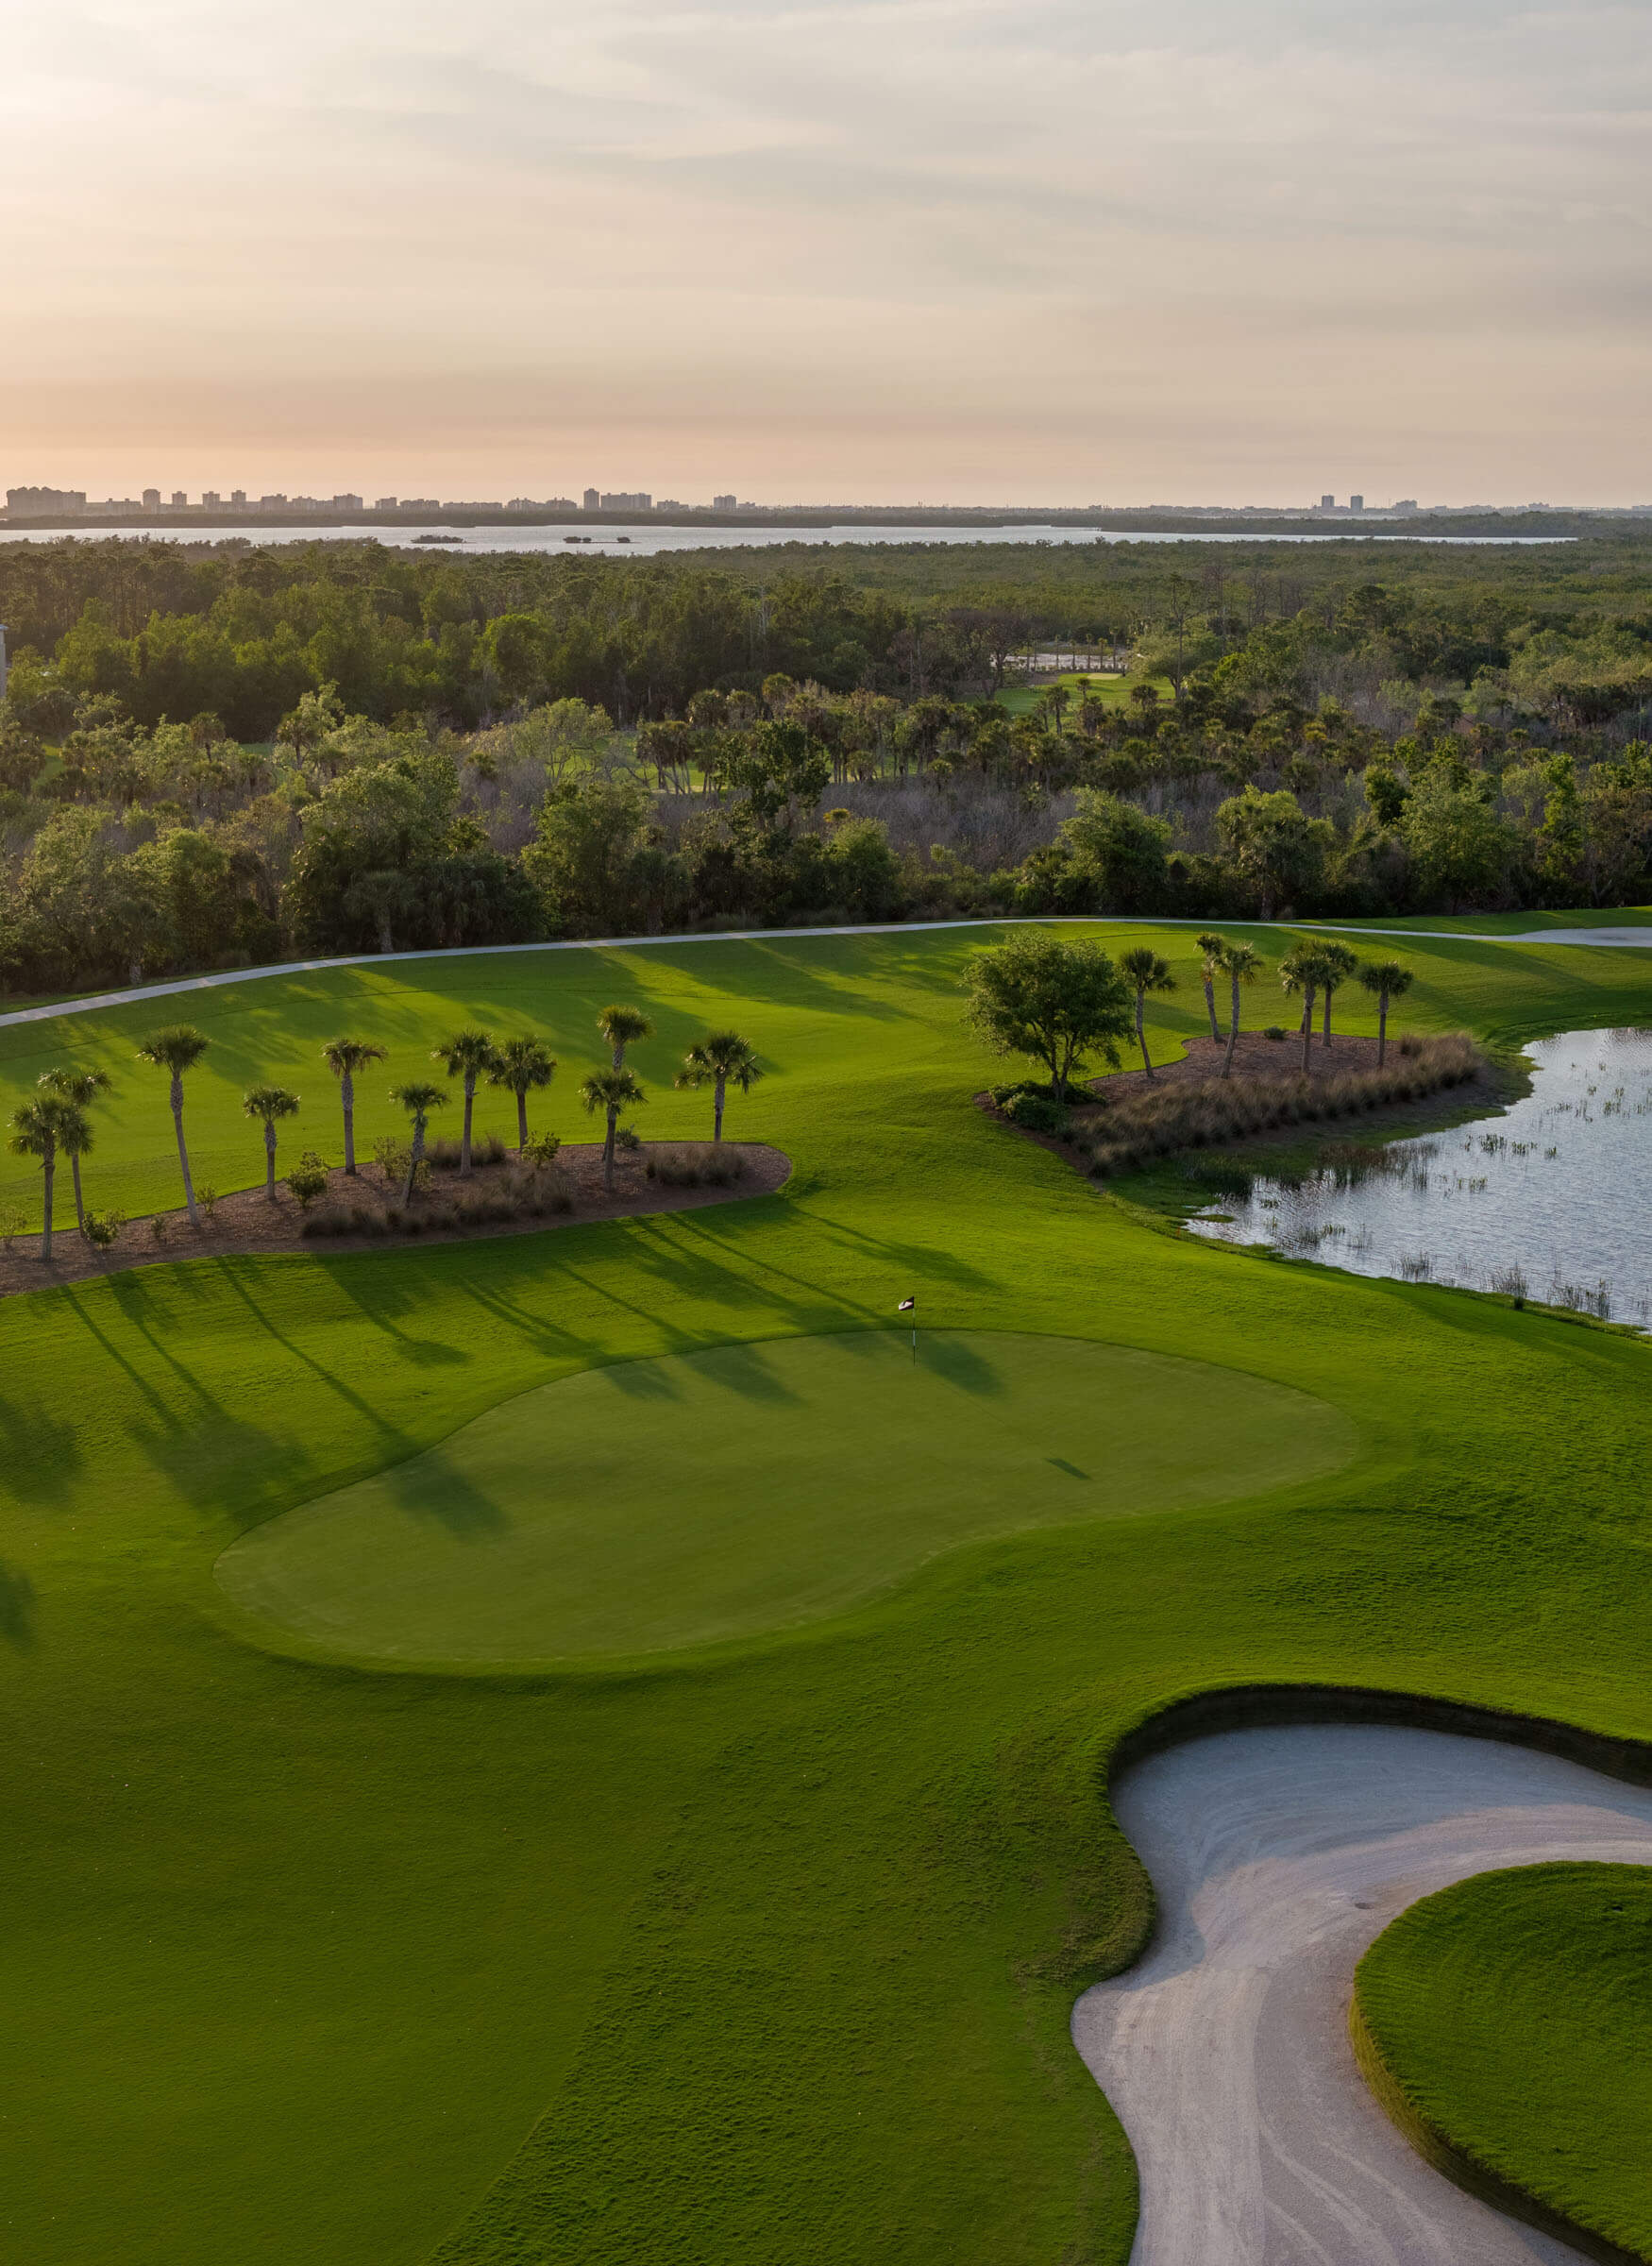 Aerial view of a lush golf course with a winding cart path, water hazards, and palm trees during sunset.